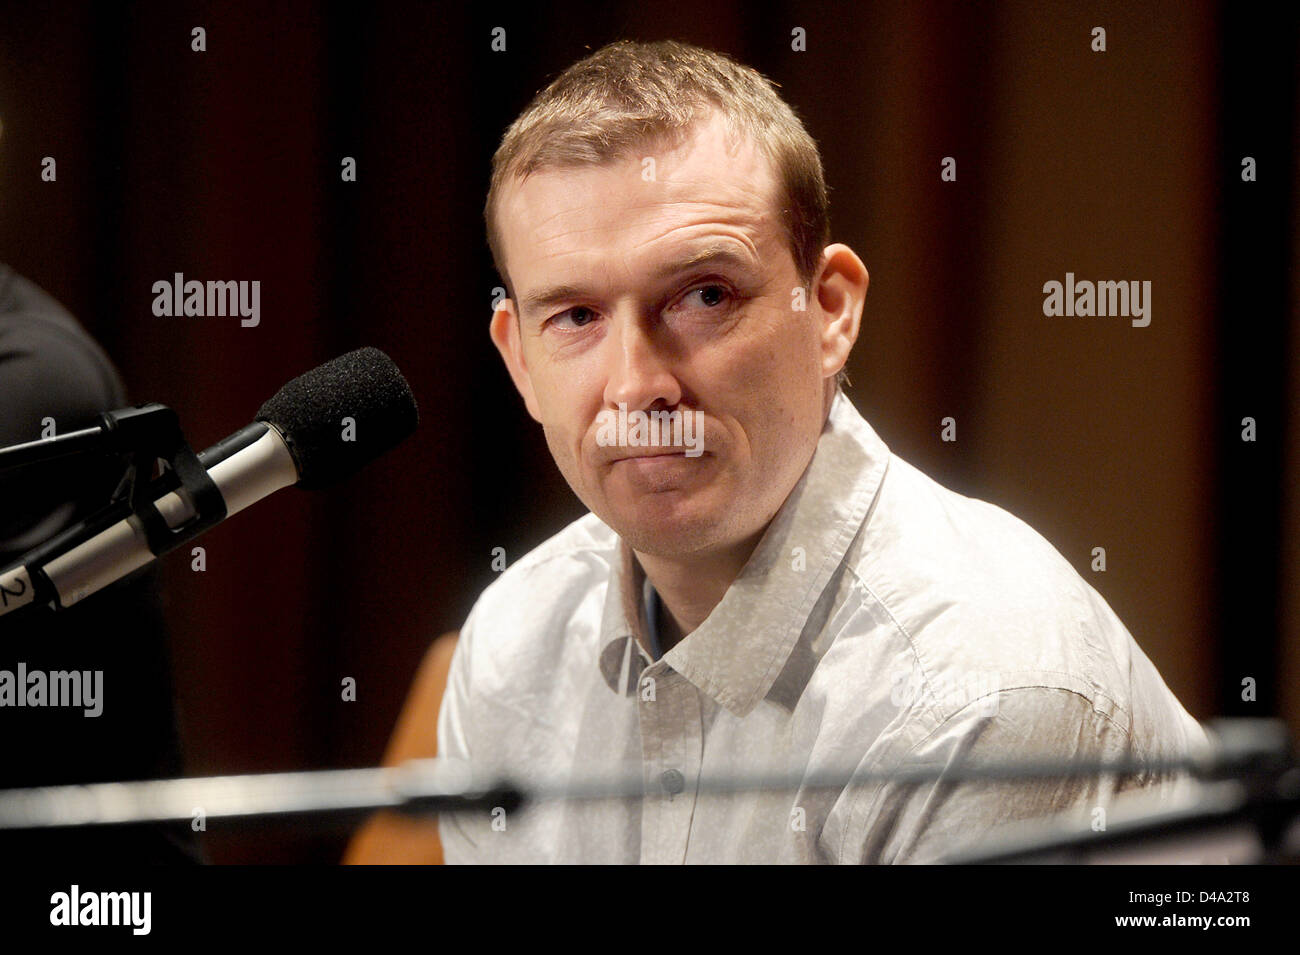 Cologne, Germany, 9th March, 2013. British writer David Mitchell attends a reading of his book 'The Thousand Autumns of Jacob de Zoet: A Novel' at the literature festival Lit.Cologne in Cologne, Germany, 09 March 2013. Photo: Henning Kaiser/dpa/Alamy Live News Stock Photo